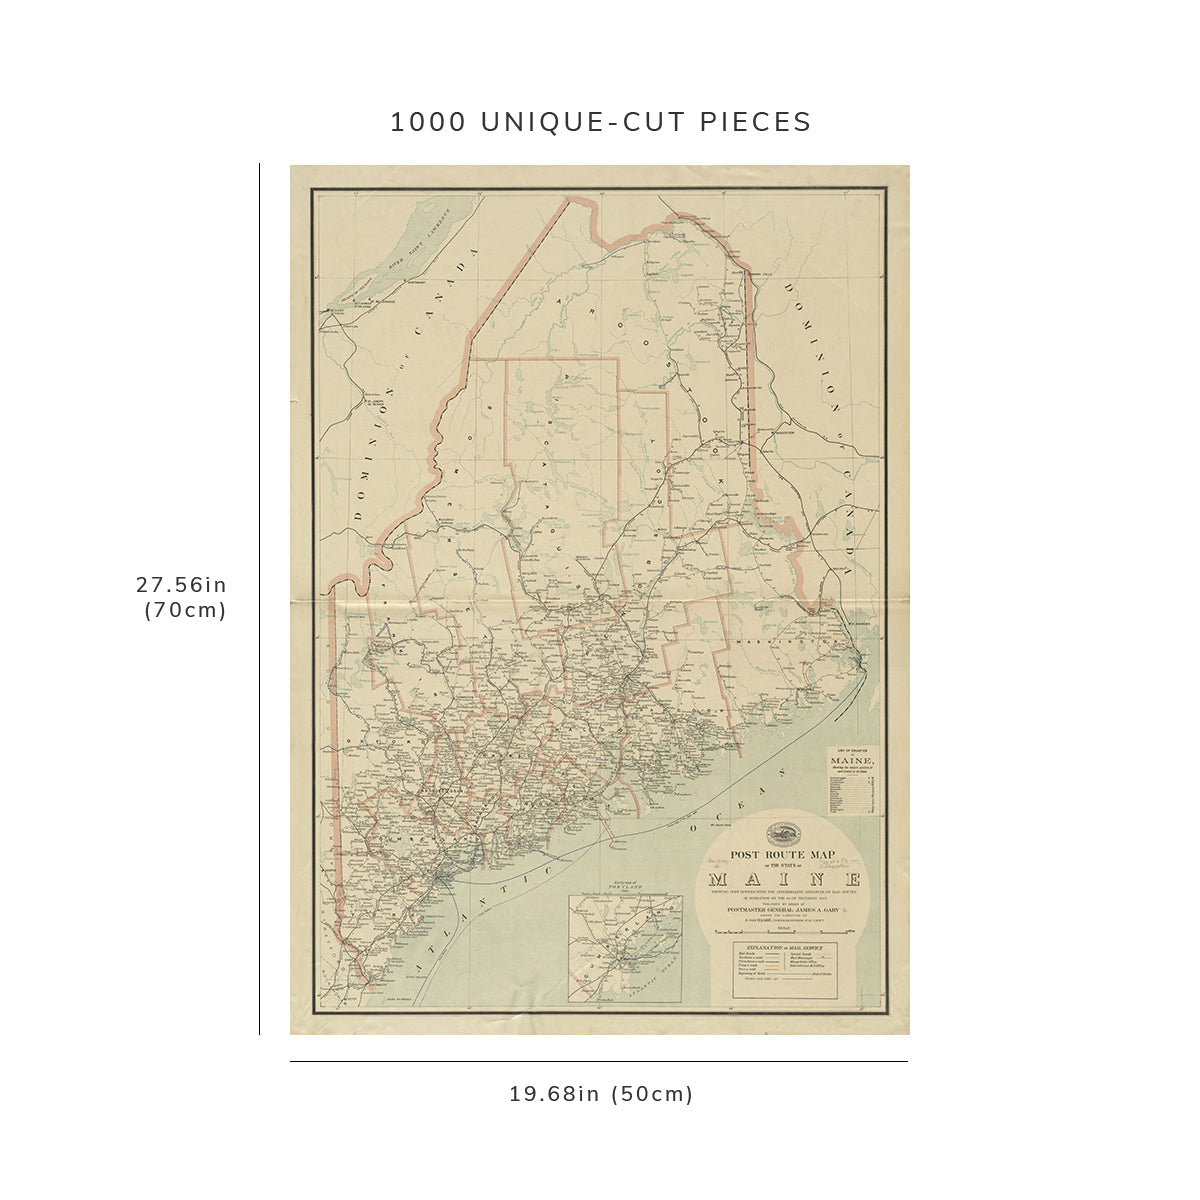 1000 Piece Jigsaw Puzzle: 1897 Map Post route of the state of Maine showing post office